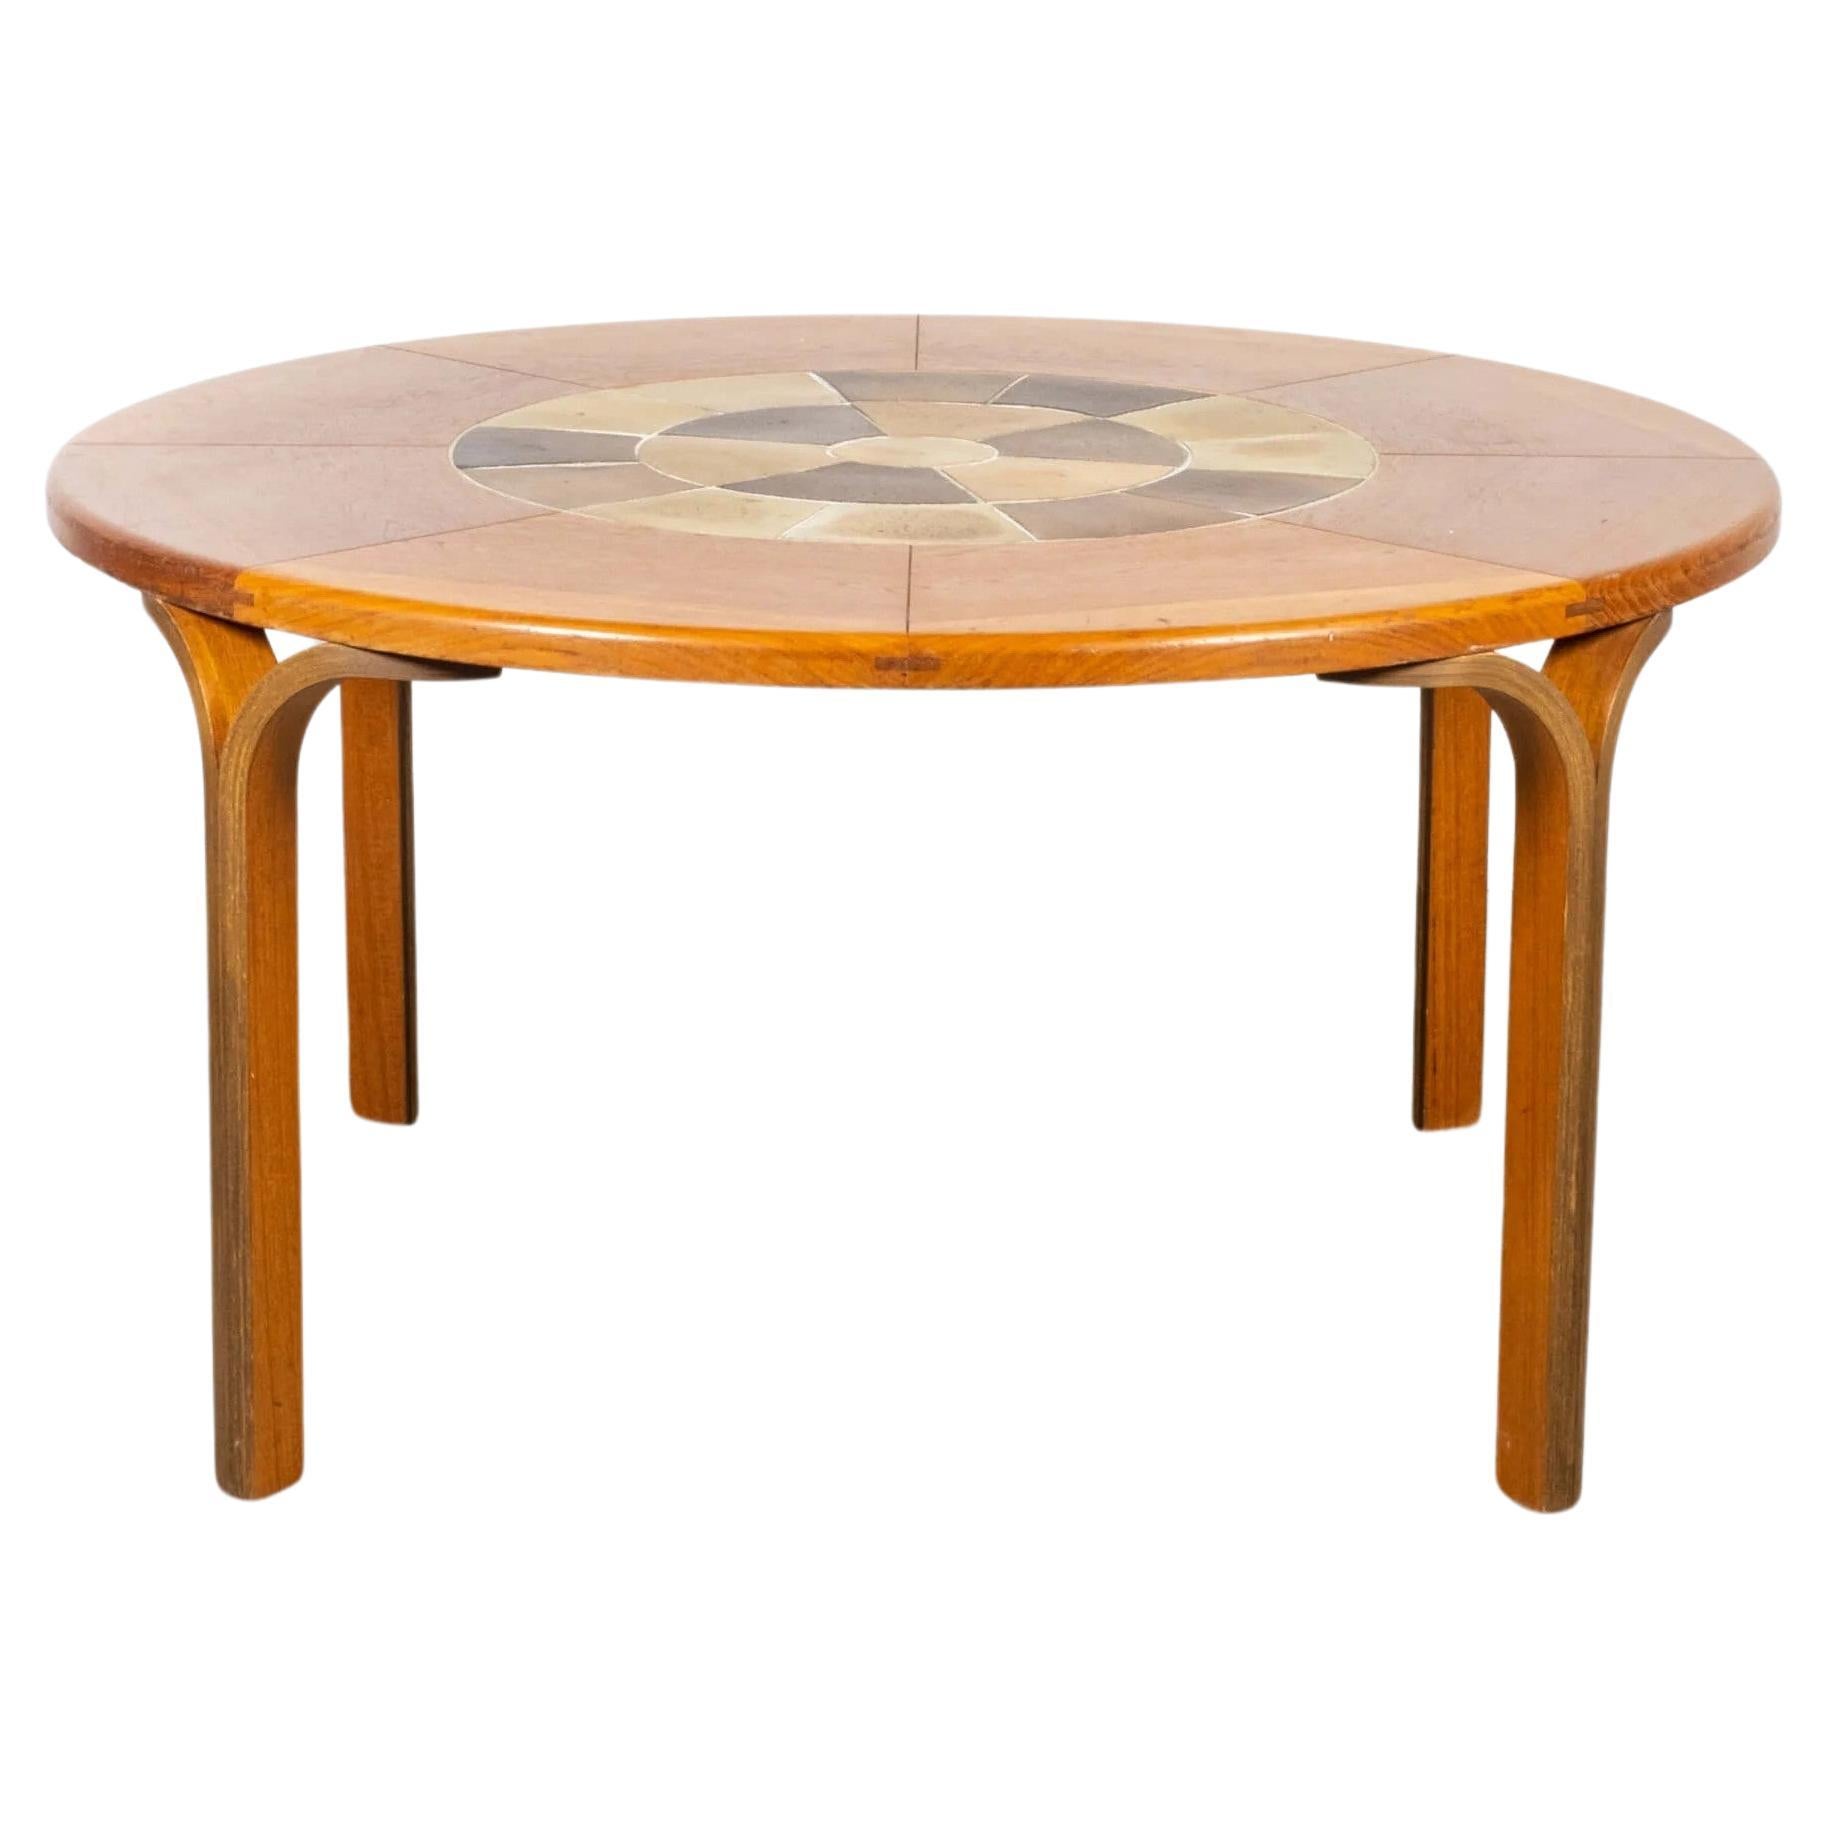 Tue Poulsen Dining Room Tables